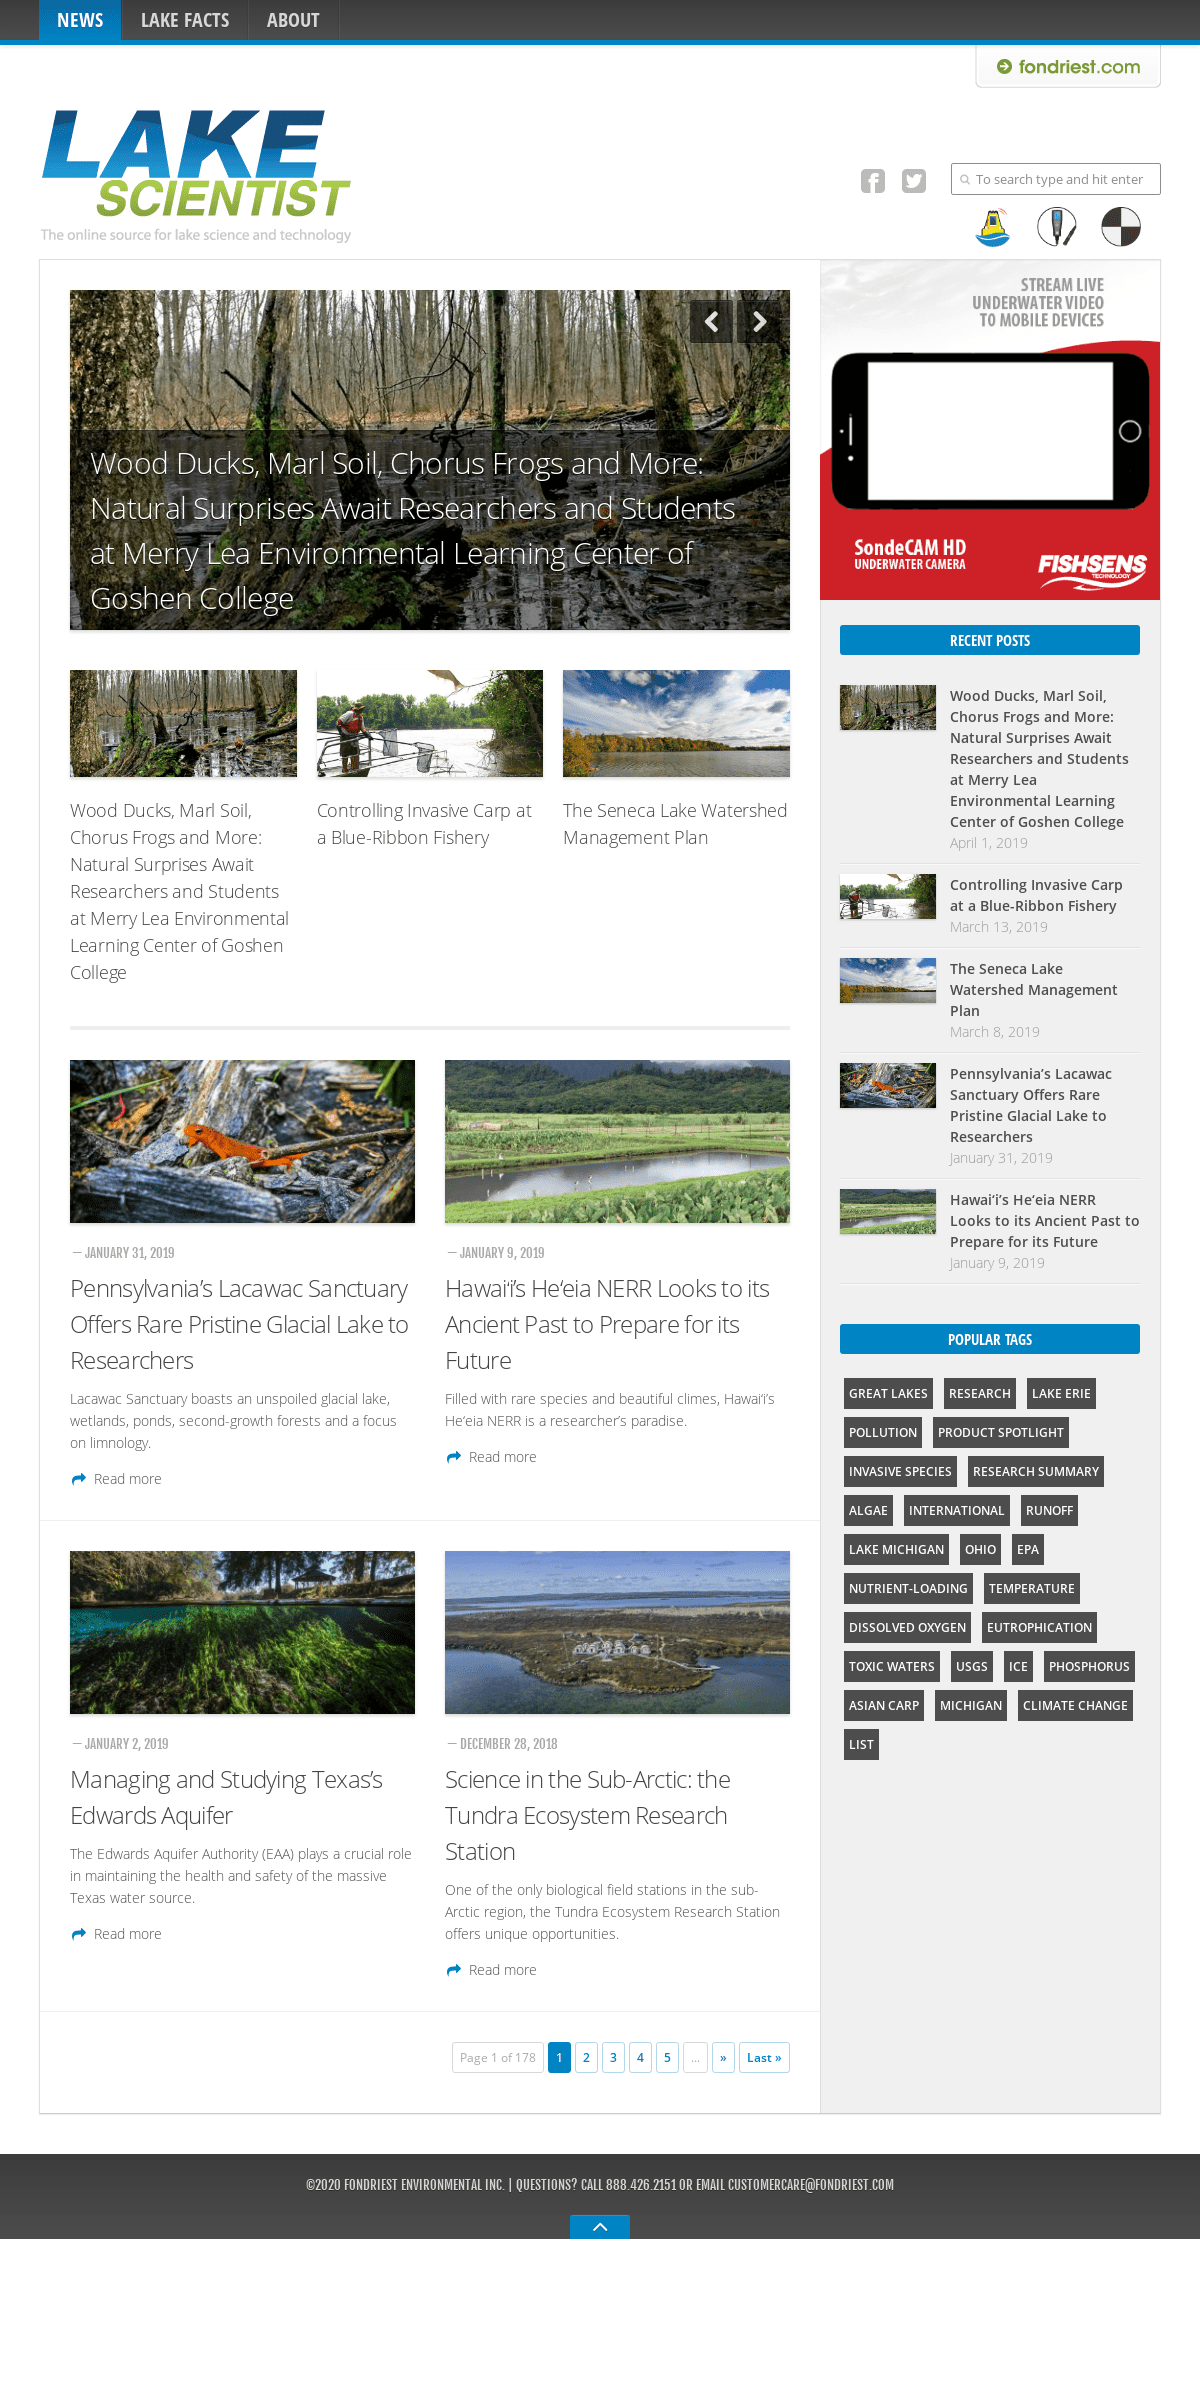 A complete backup of lakescientist.com